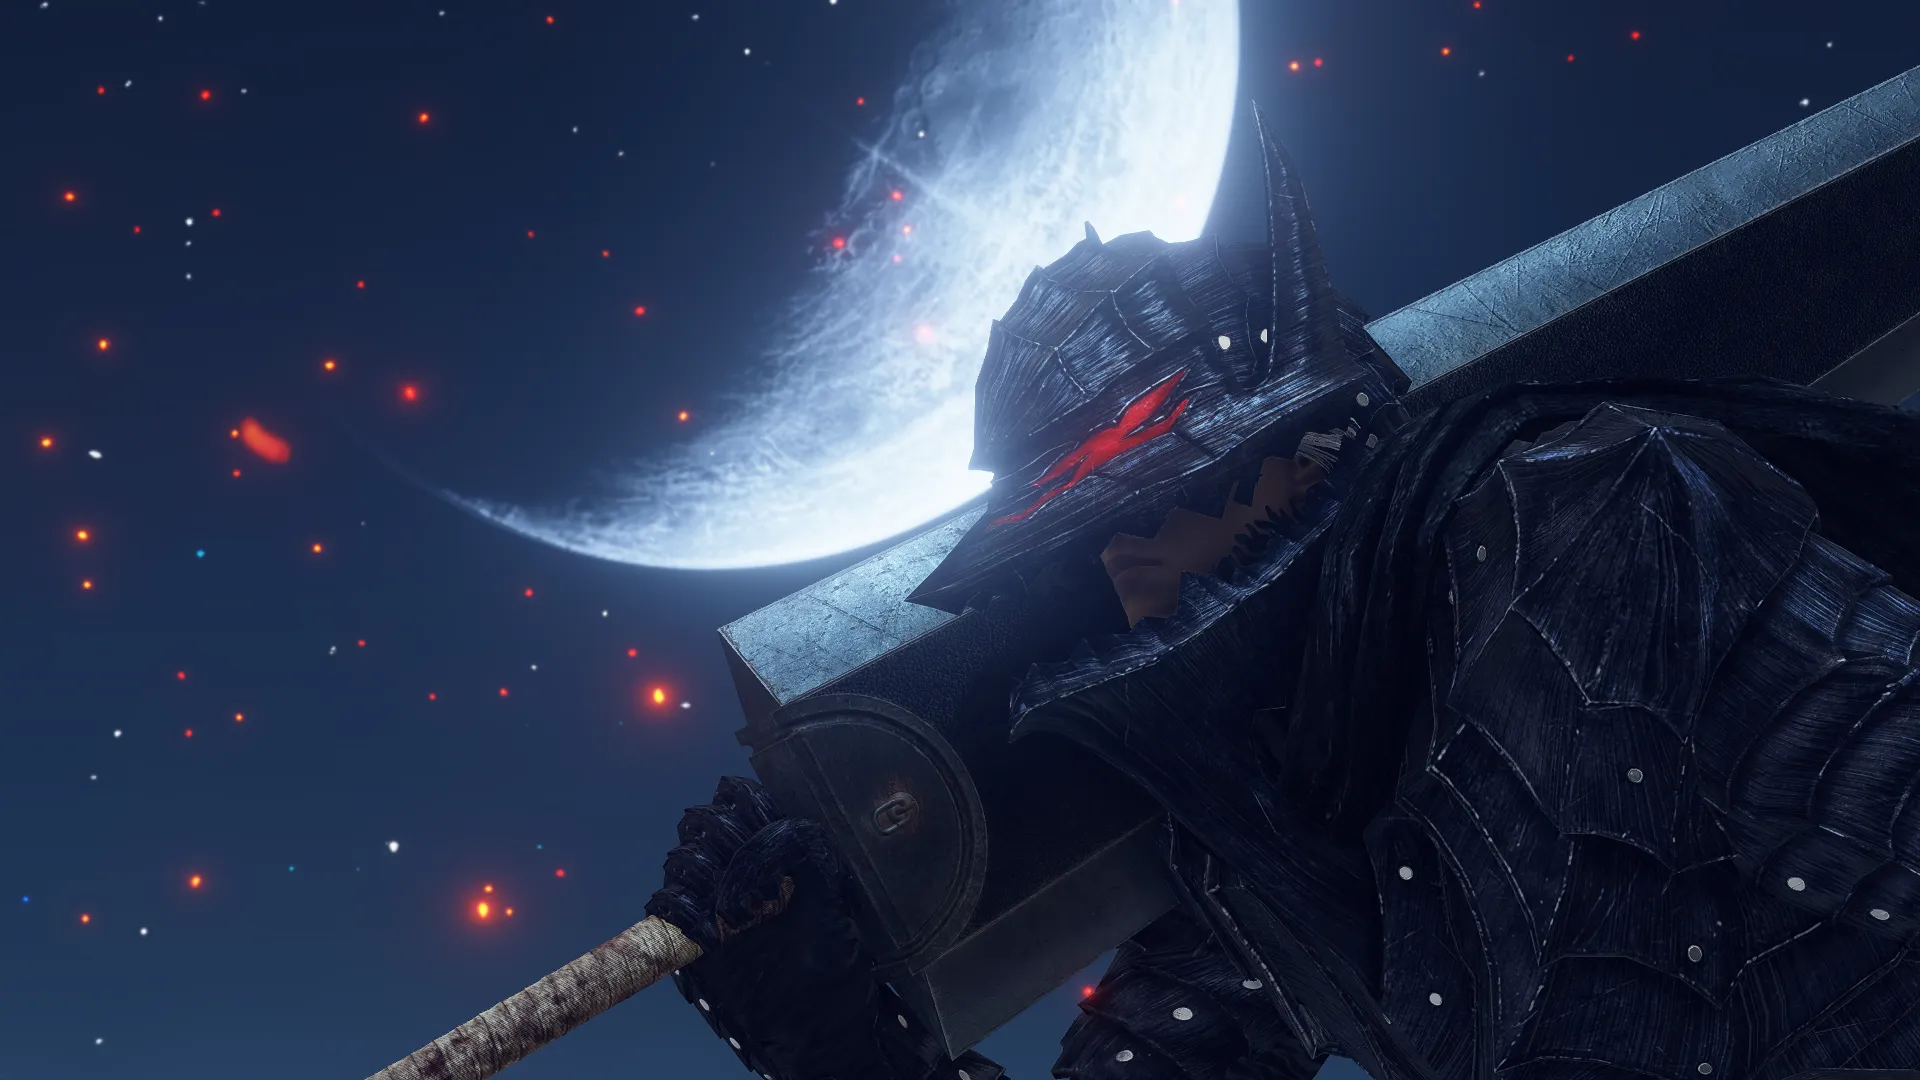 An Elden Ring Mod in action shows Berserk's protagonist Guts in his berserker armor complete with his famous Dragon Slayer sword as the big and bright moon hovers above him.